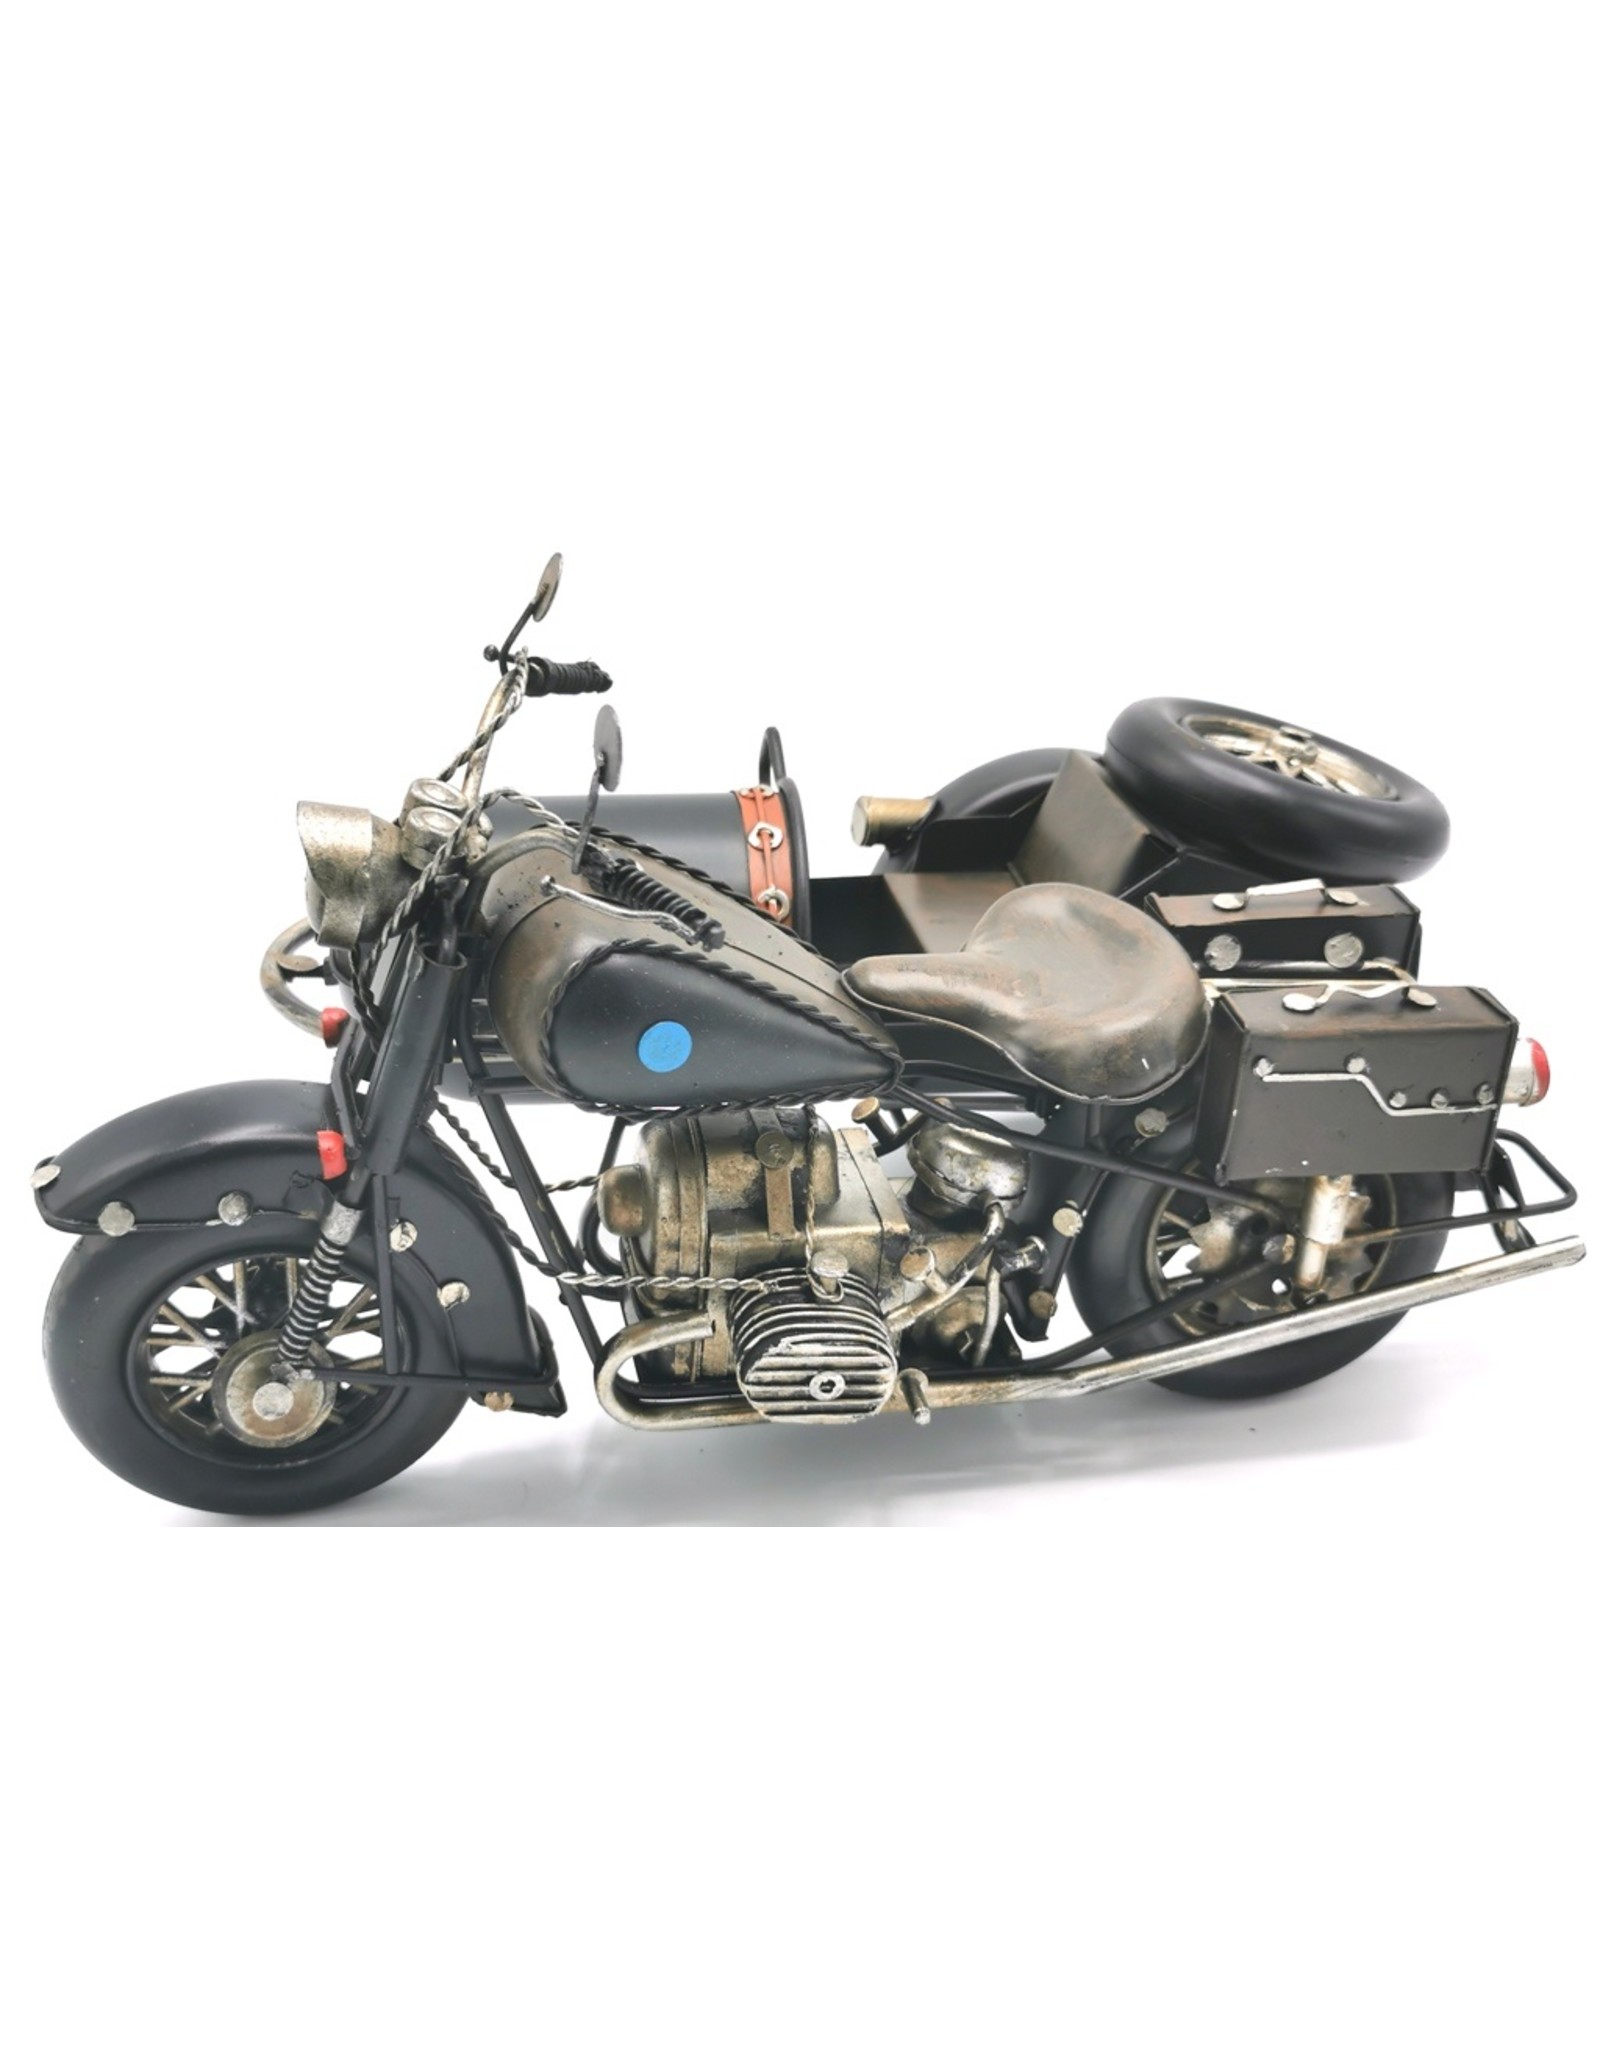 Trukado Miscellaneous - Vintage motorbike with sidecar scale model